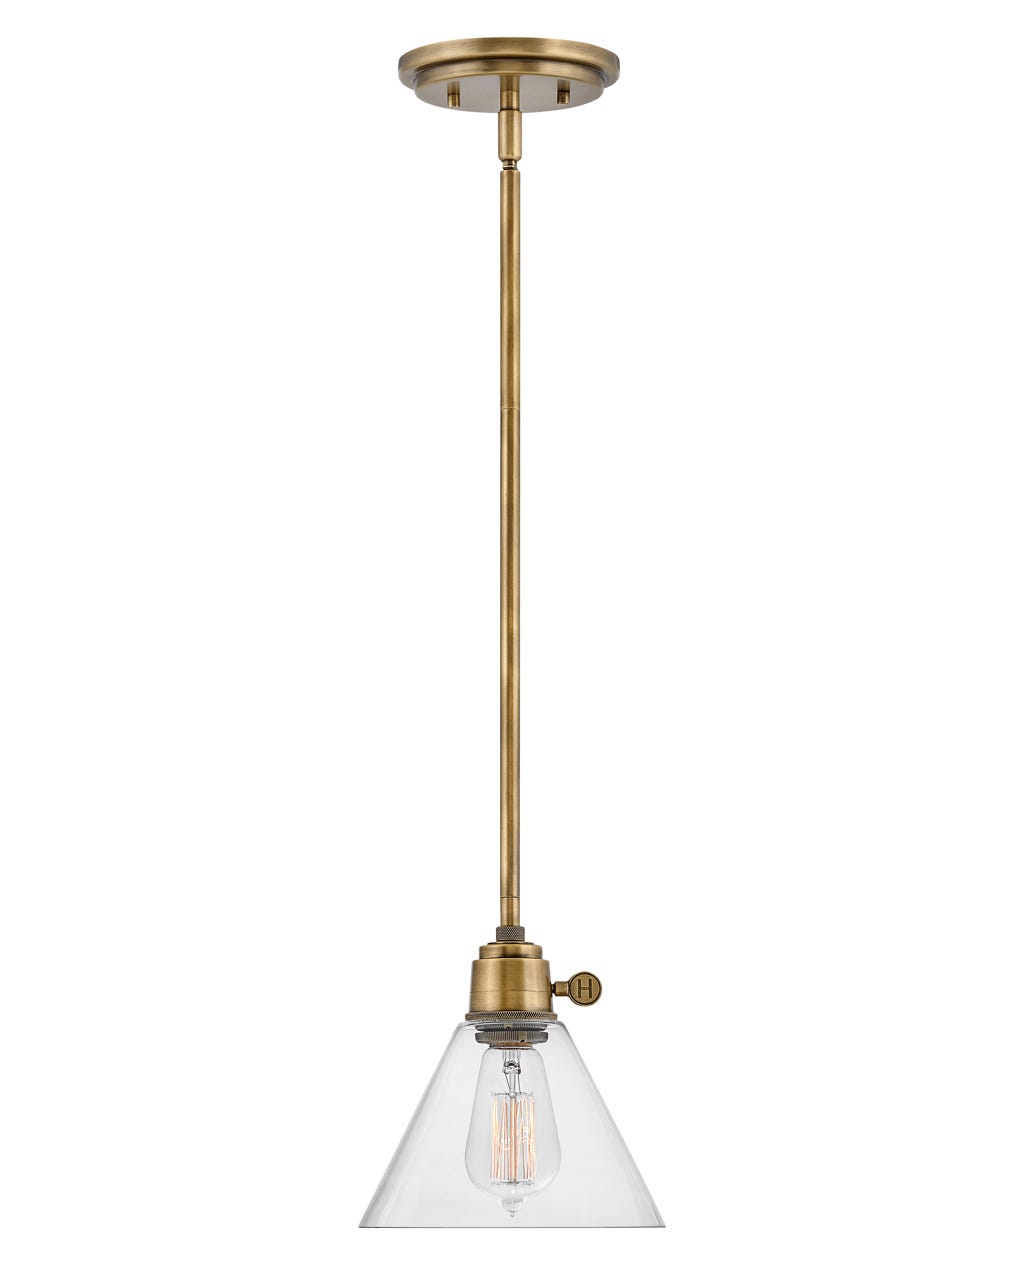 Hinkley Arti Pendant Pendant Hinkley Heritage Brass with Clear glass 7.5x7.5x8.25 